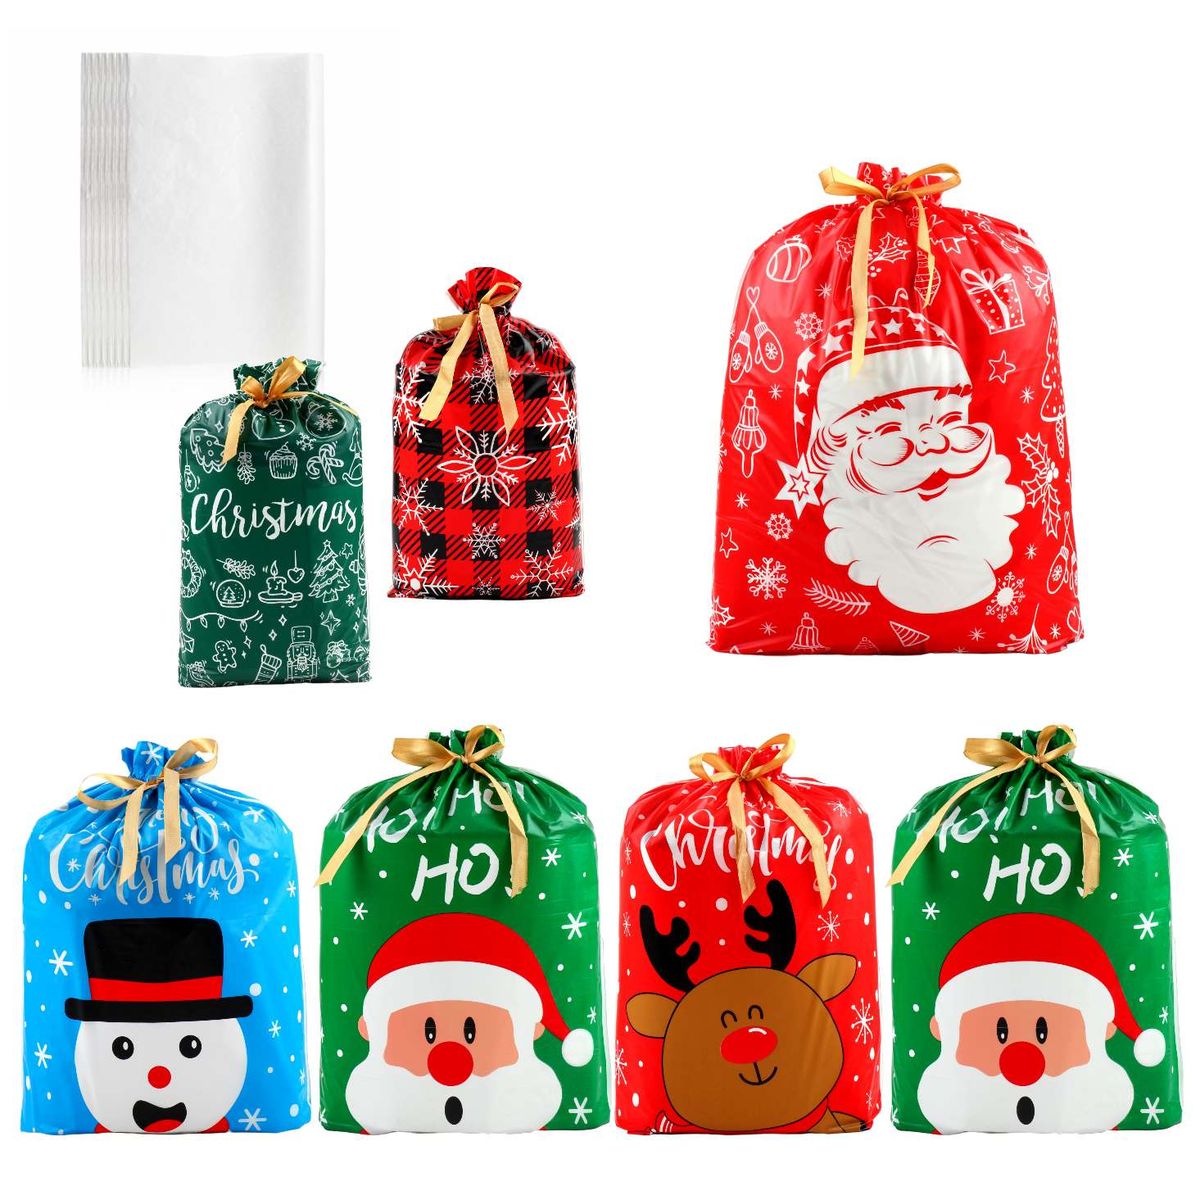 Plastic Christmas Cute Wrapping Gift Bags - Value Pack of 7 - Original